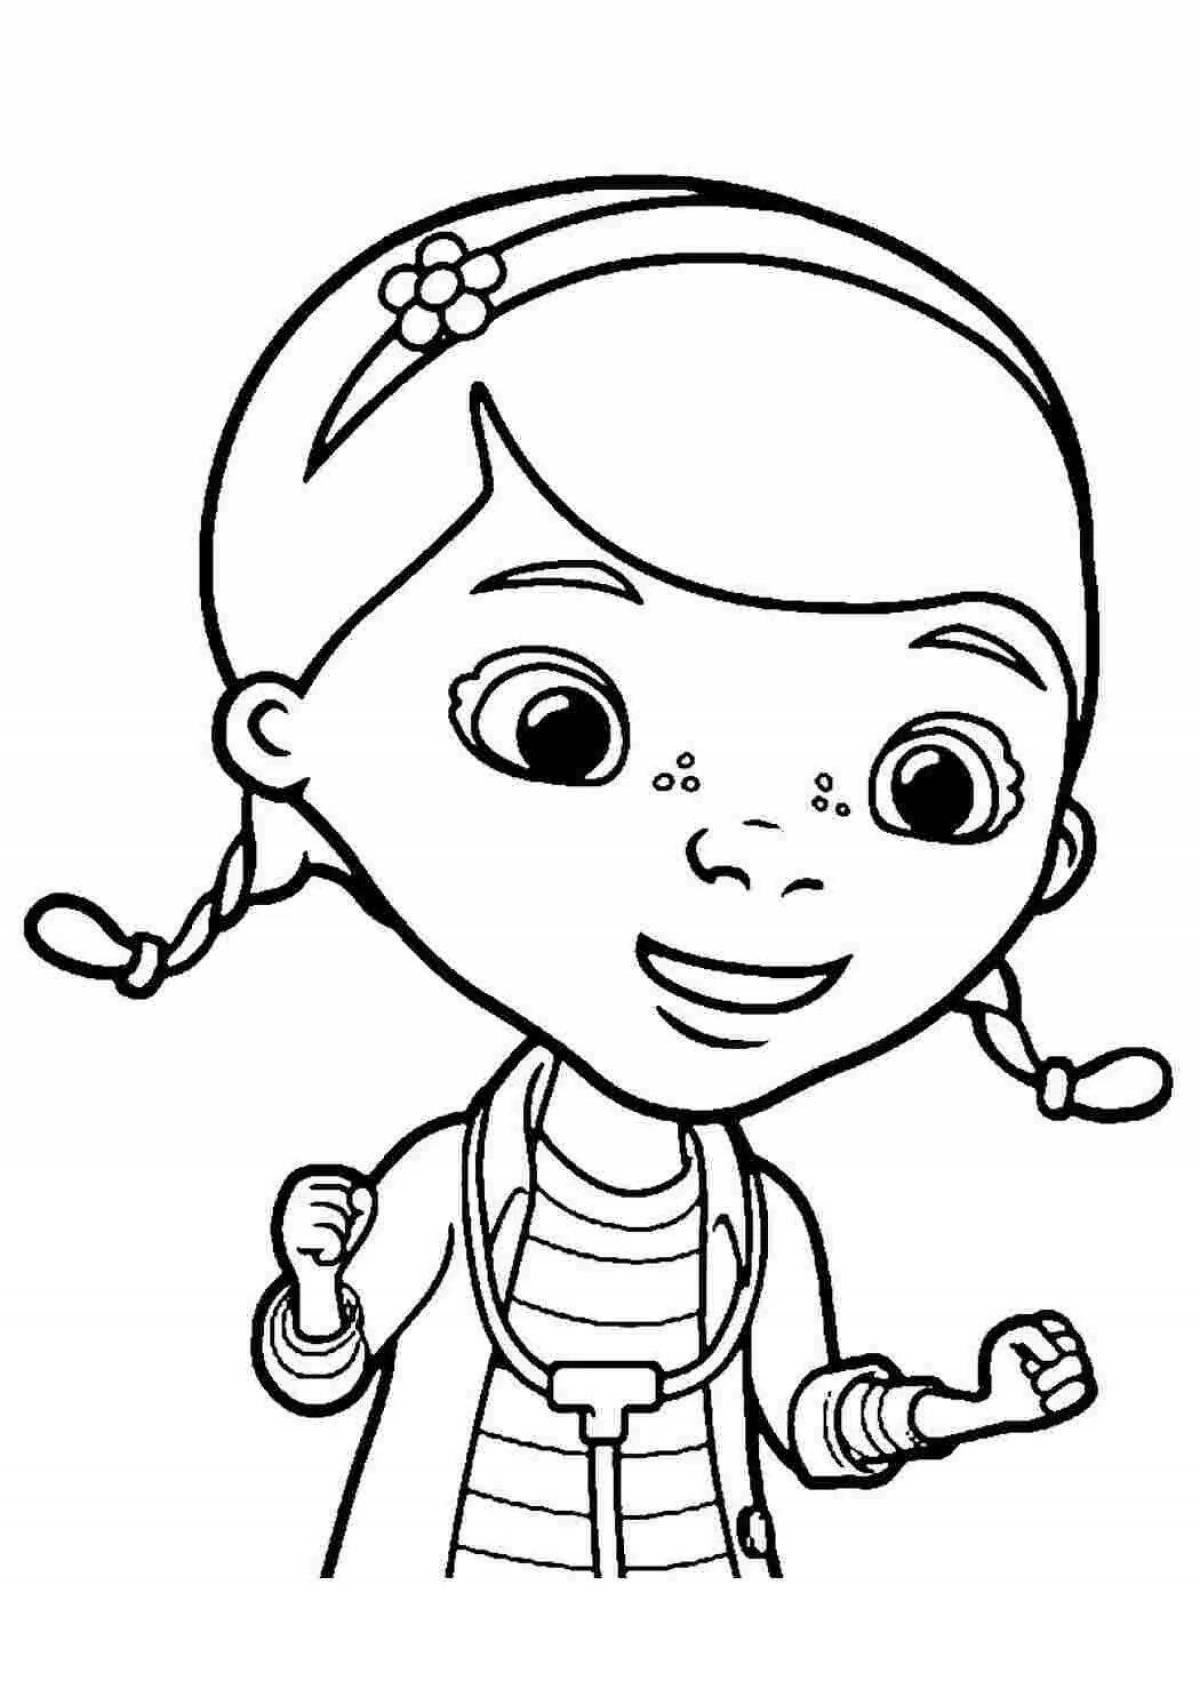 Adorable Doctor Plush Coloring Book for Kids